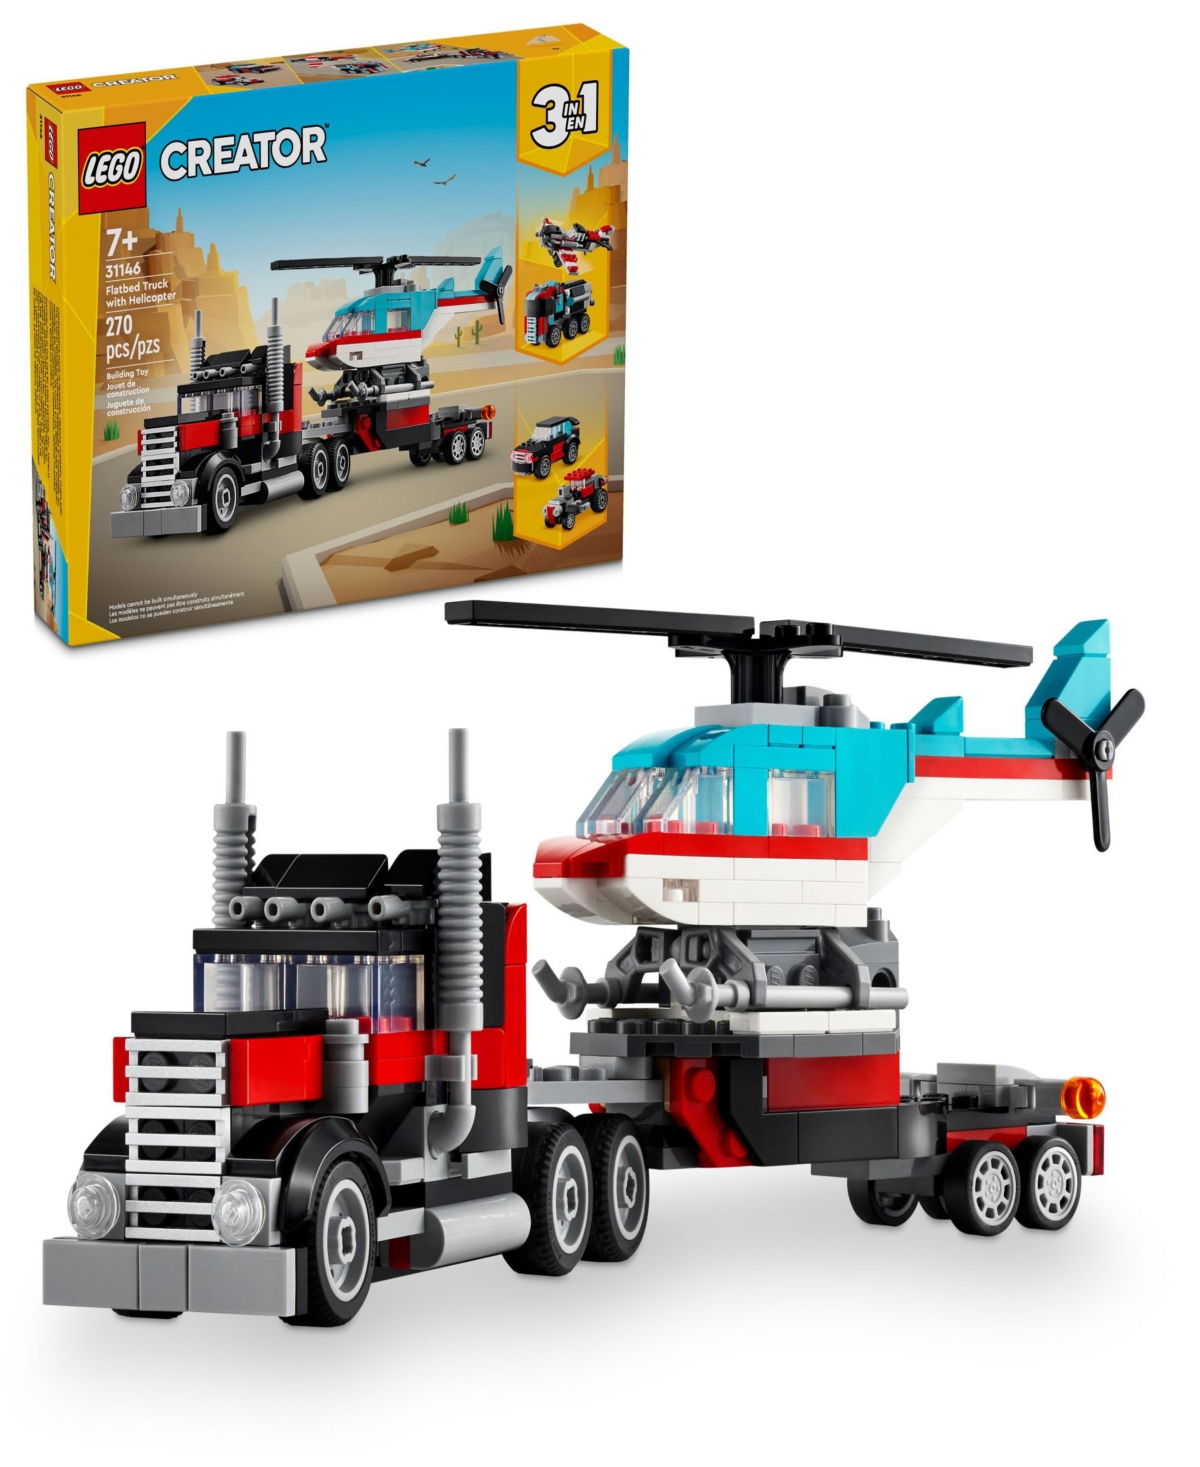 Lego Creator 3 In 1 Flatbed Truck With Helicopter Toy 31146, 270 Pieces In Multicolor